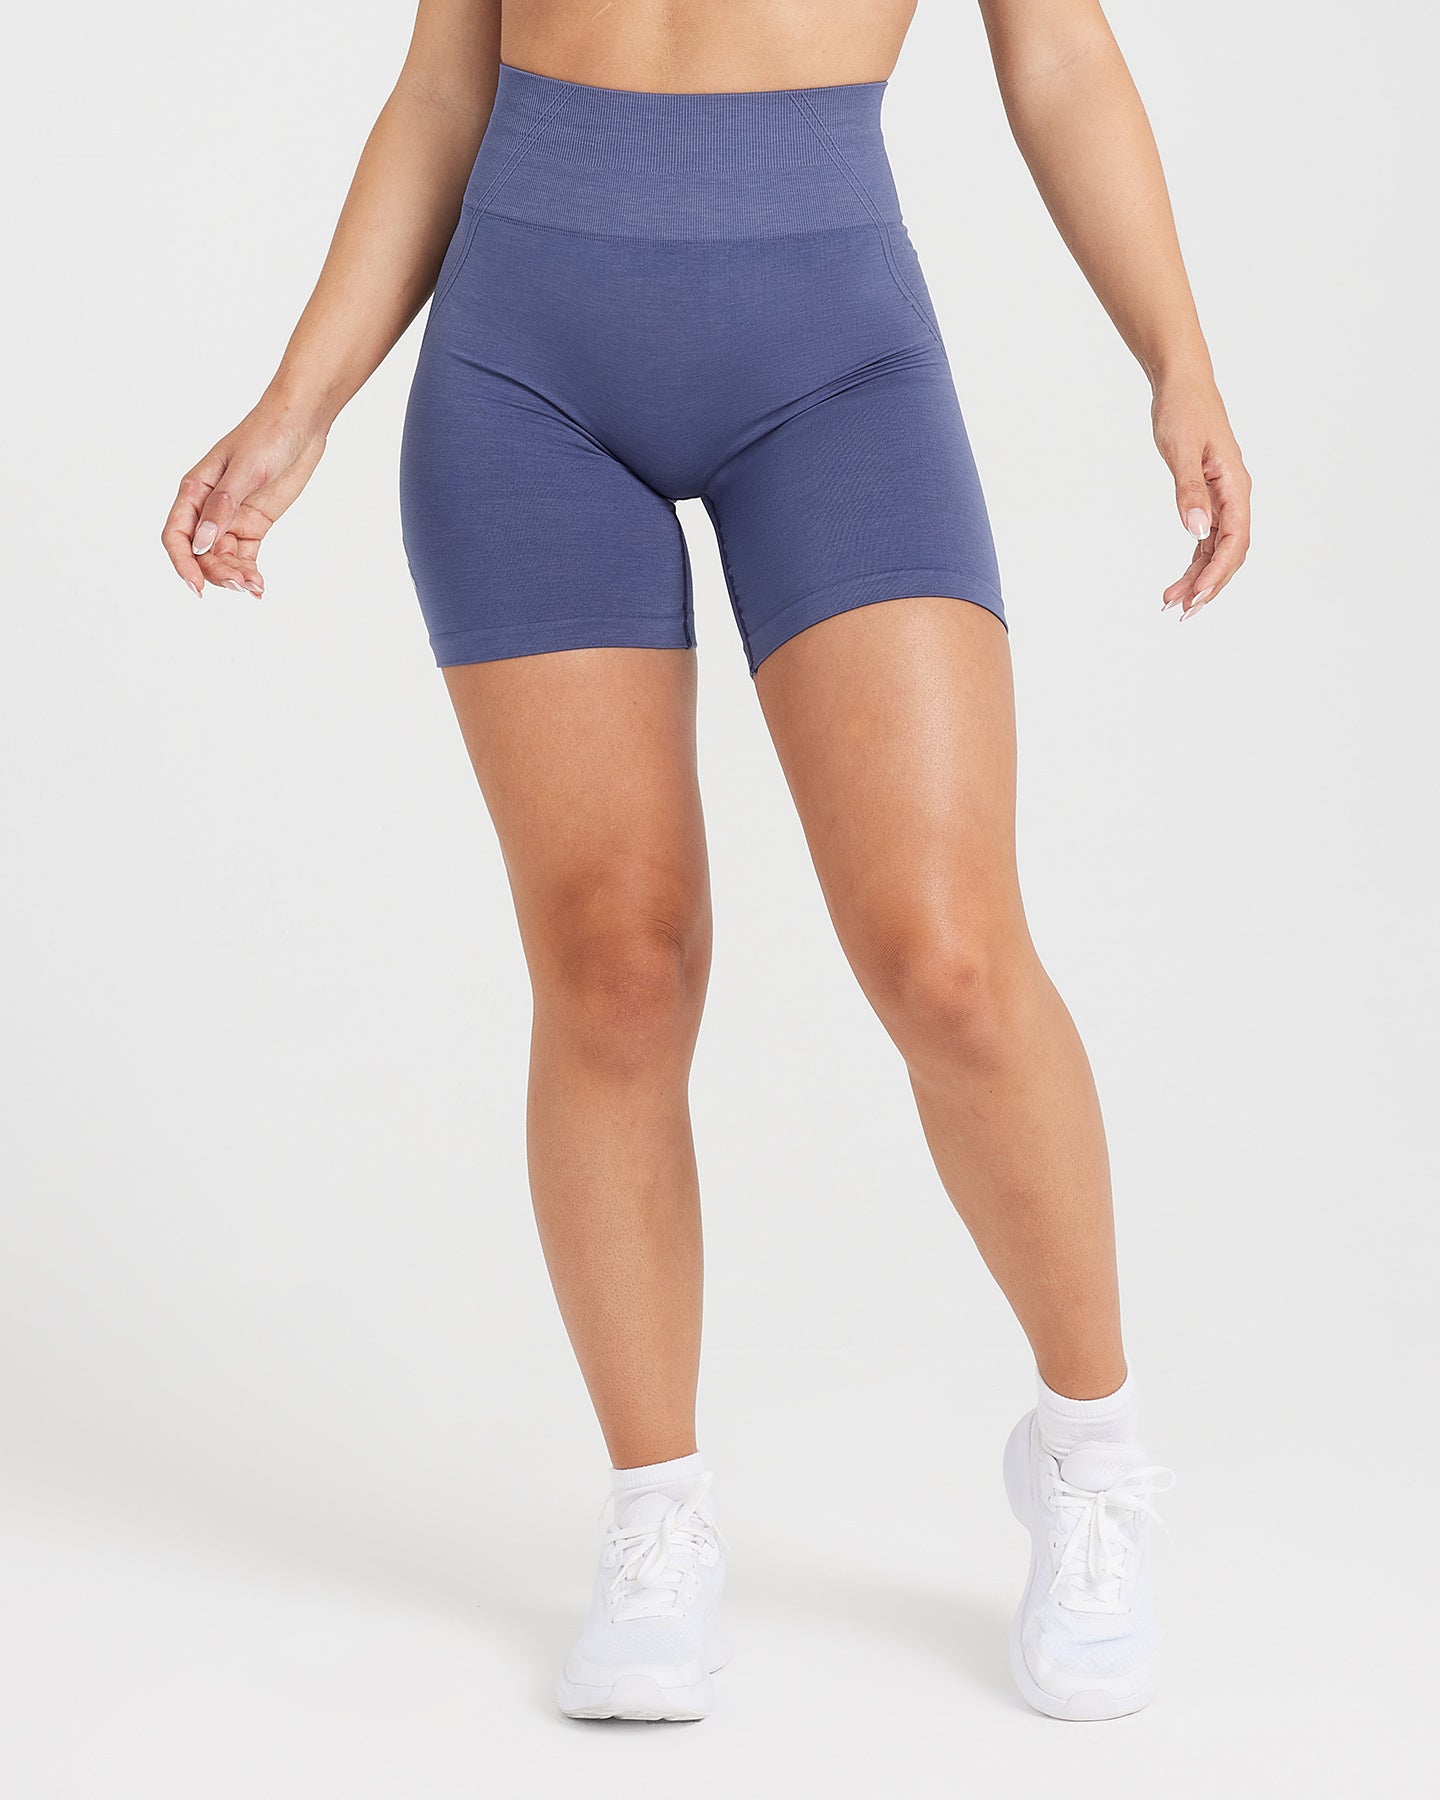 Cycling Shorts for Women Slate Oner Blue - Active US 